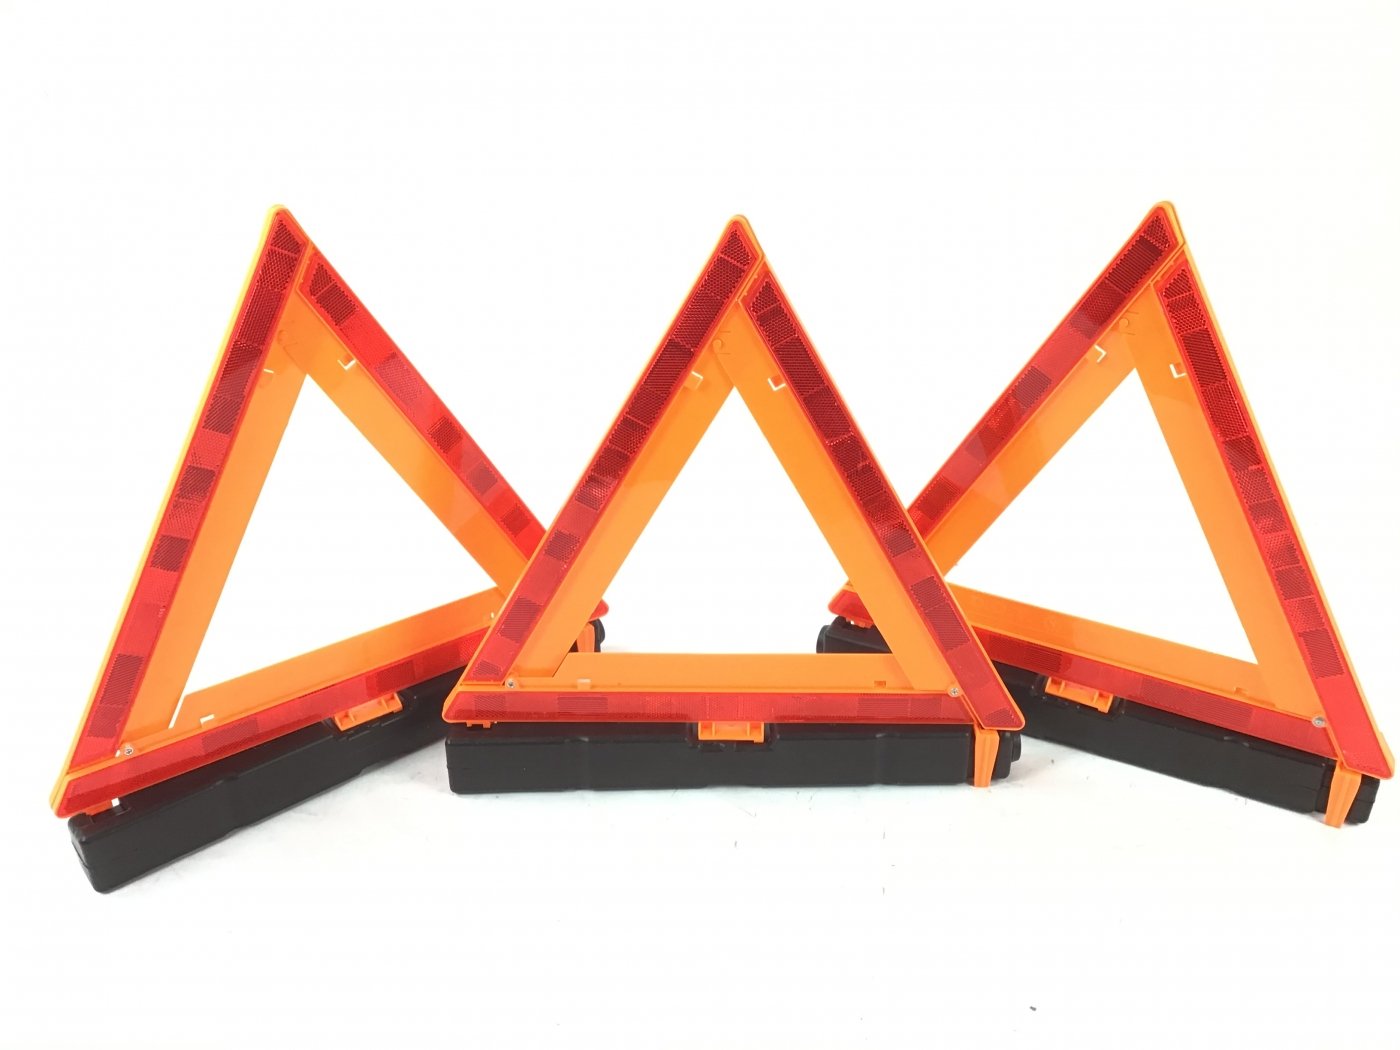 17.5 inch Warning Triangles (reflective)- 3 pack with storage box